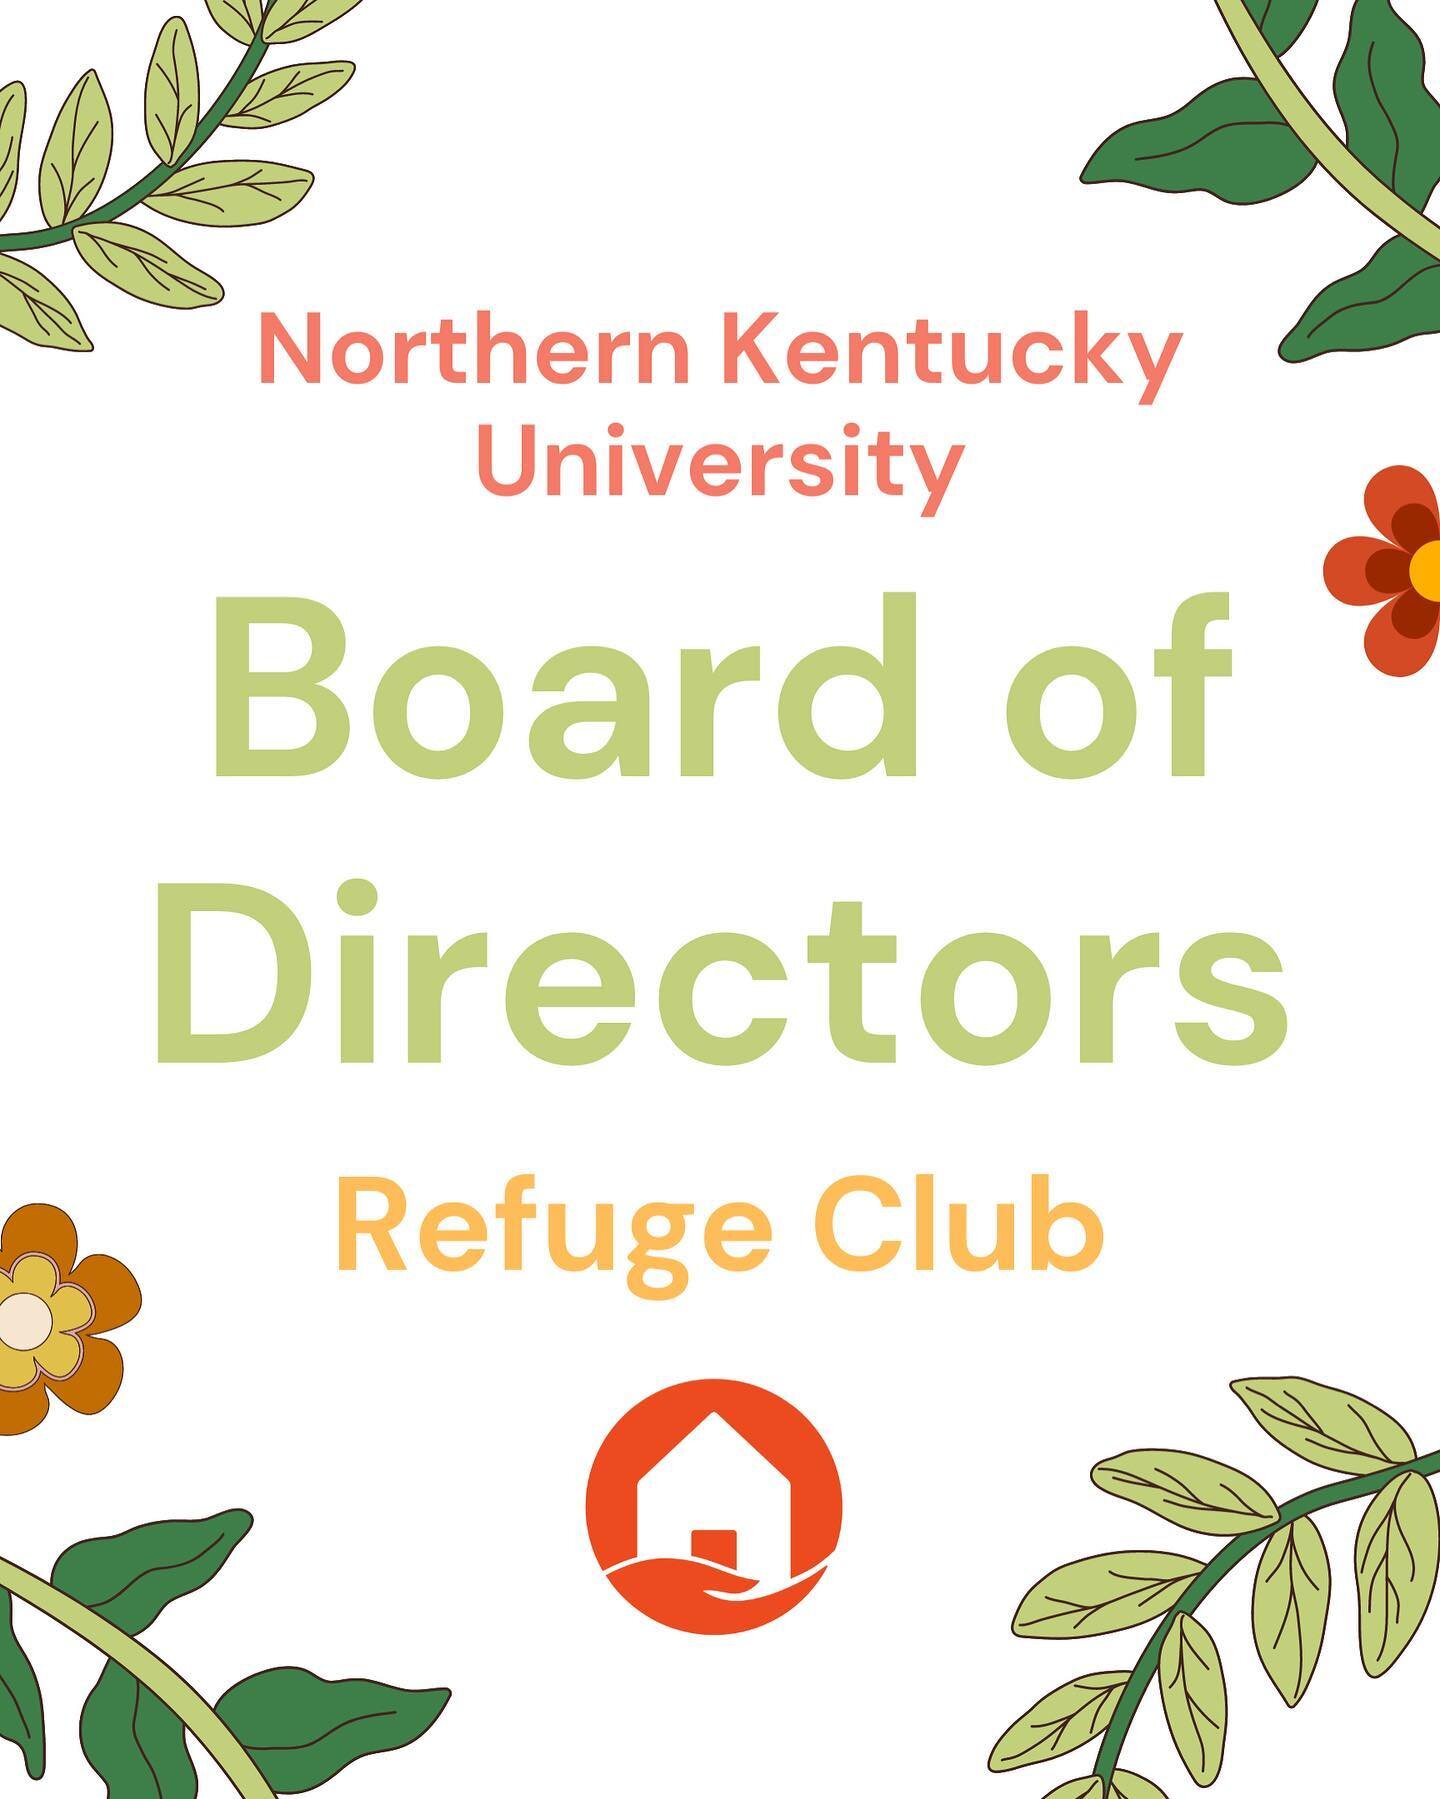 LET&rsquo;S START FALL &lsquo;23 🩵🩵
hey guys we&rsquo;re so excited to be back and kick-start the Refuge Club at NKU as soon as possible!! But first we would like to re-introduce our e-board. Stay tuned for our next post!